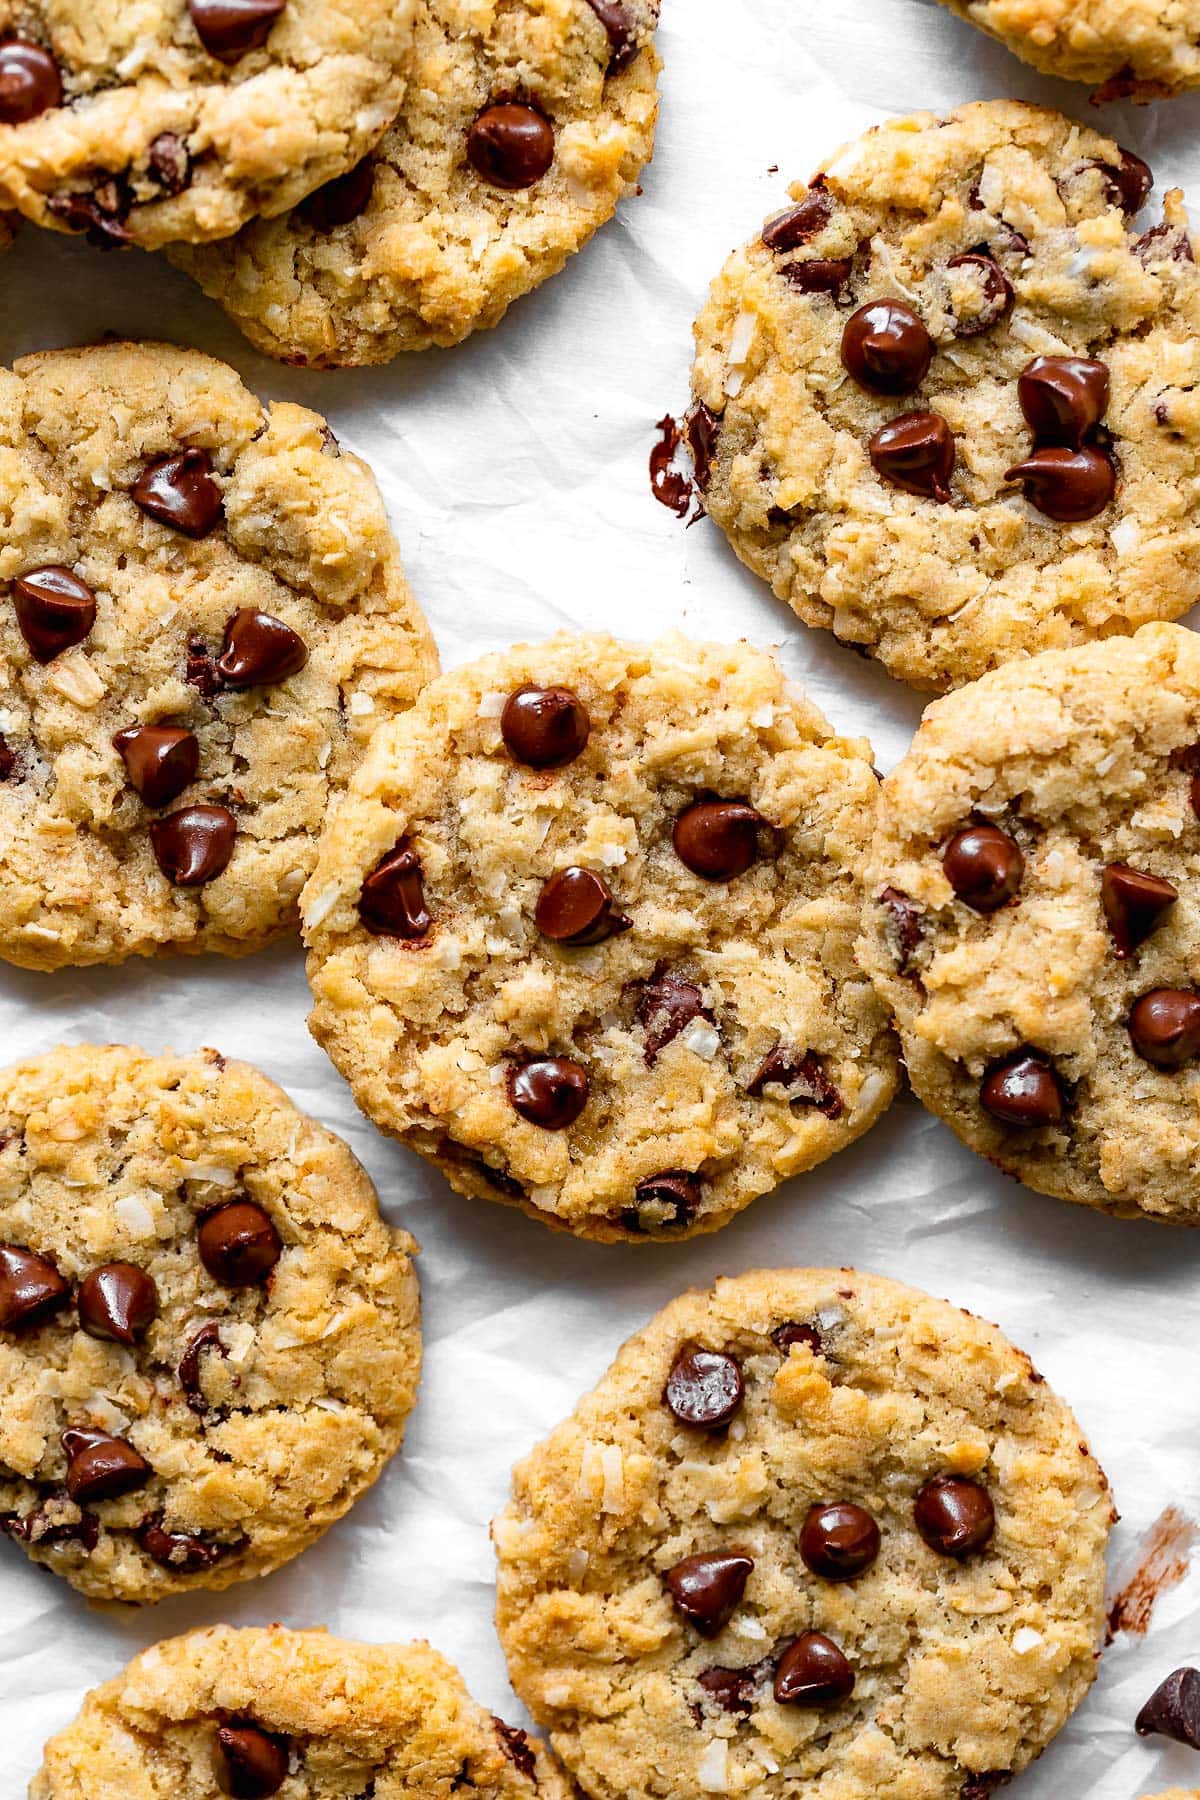 19 Must-Have Cookie Baking Essentials That I Swear By - Two Peas & Their Pod